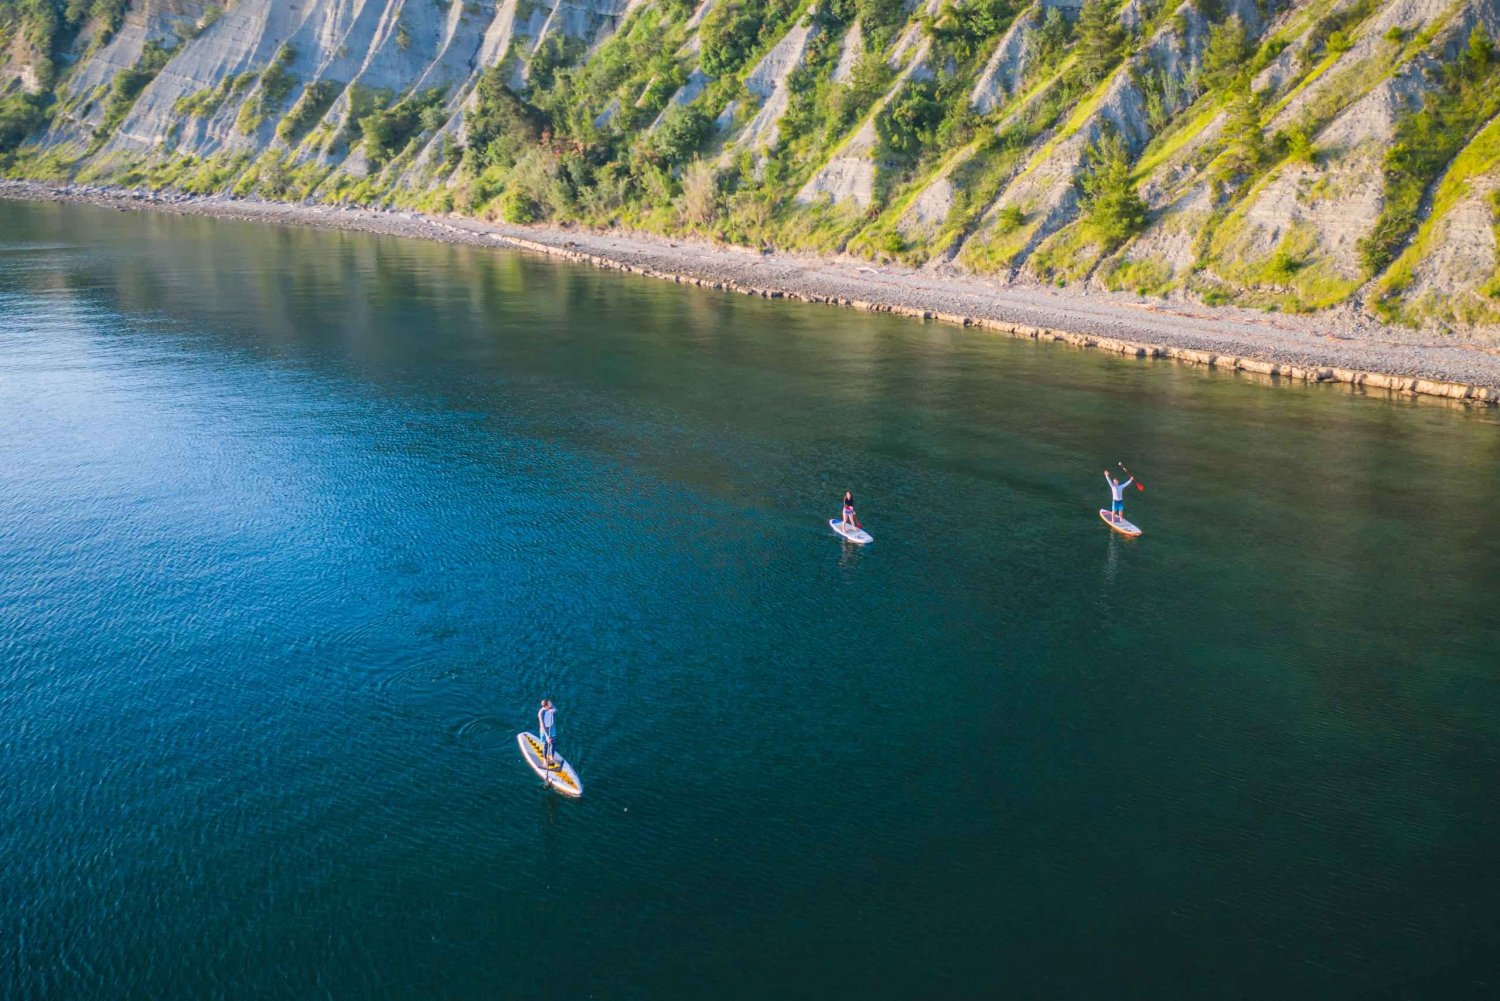 SUP Adventure: Paddle through the Magical Moon Bay